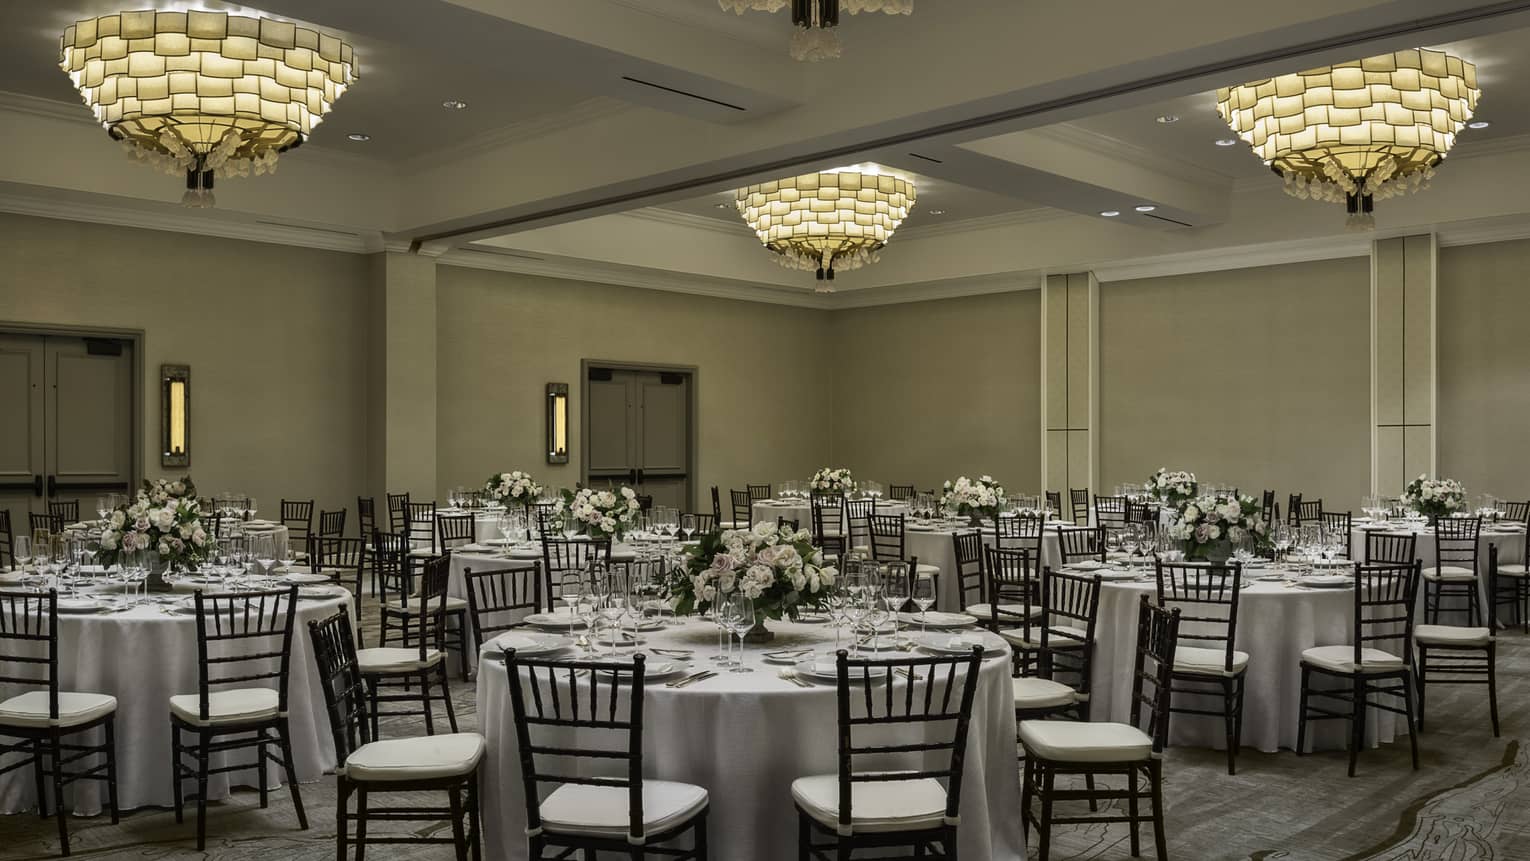 Large round banquet dining tables and chairs under three small chandeliers